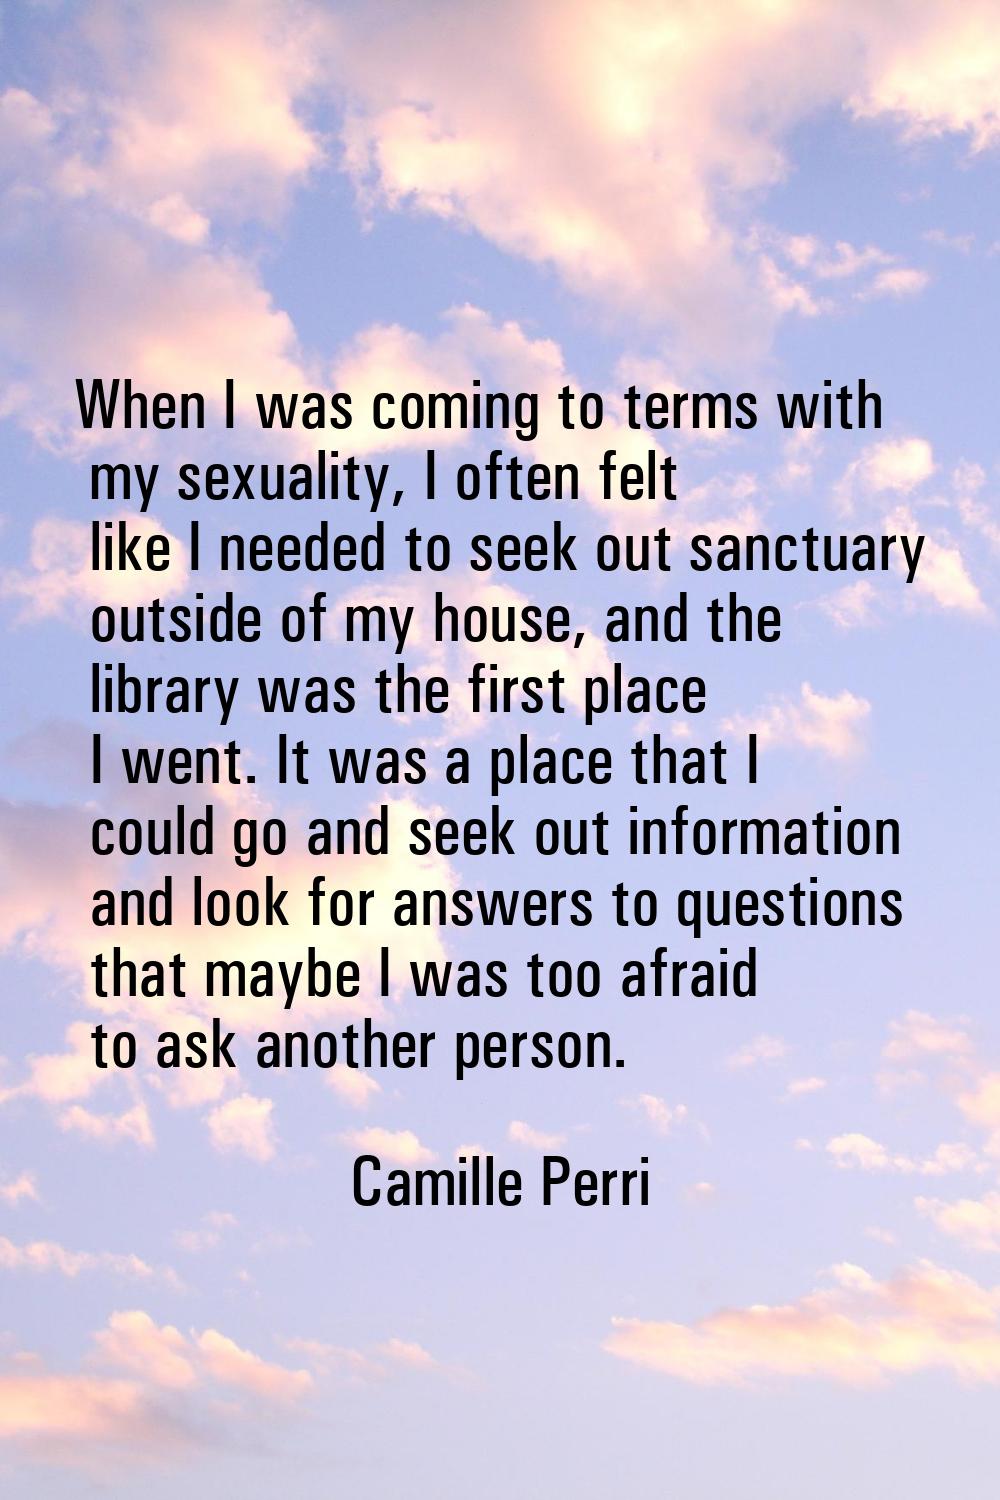 When I was coming to terms with my sexuality, I often felt like I needed to seek out sanctuary outs